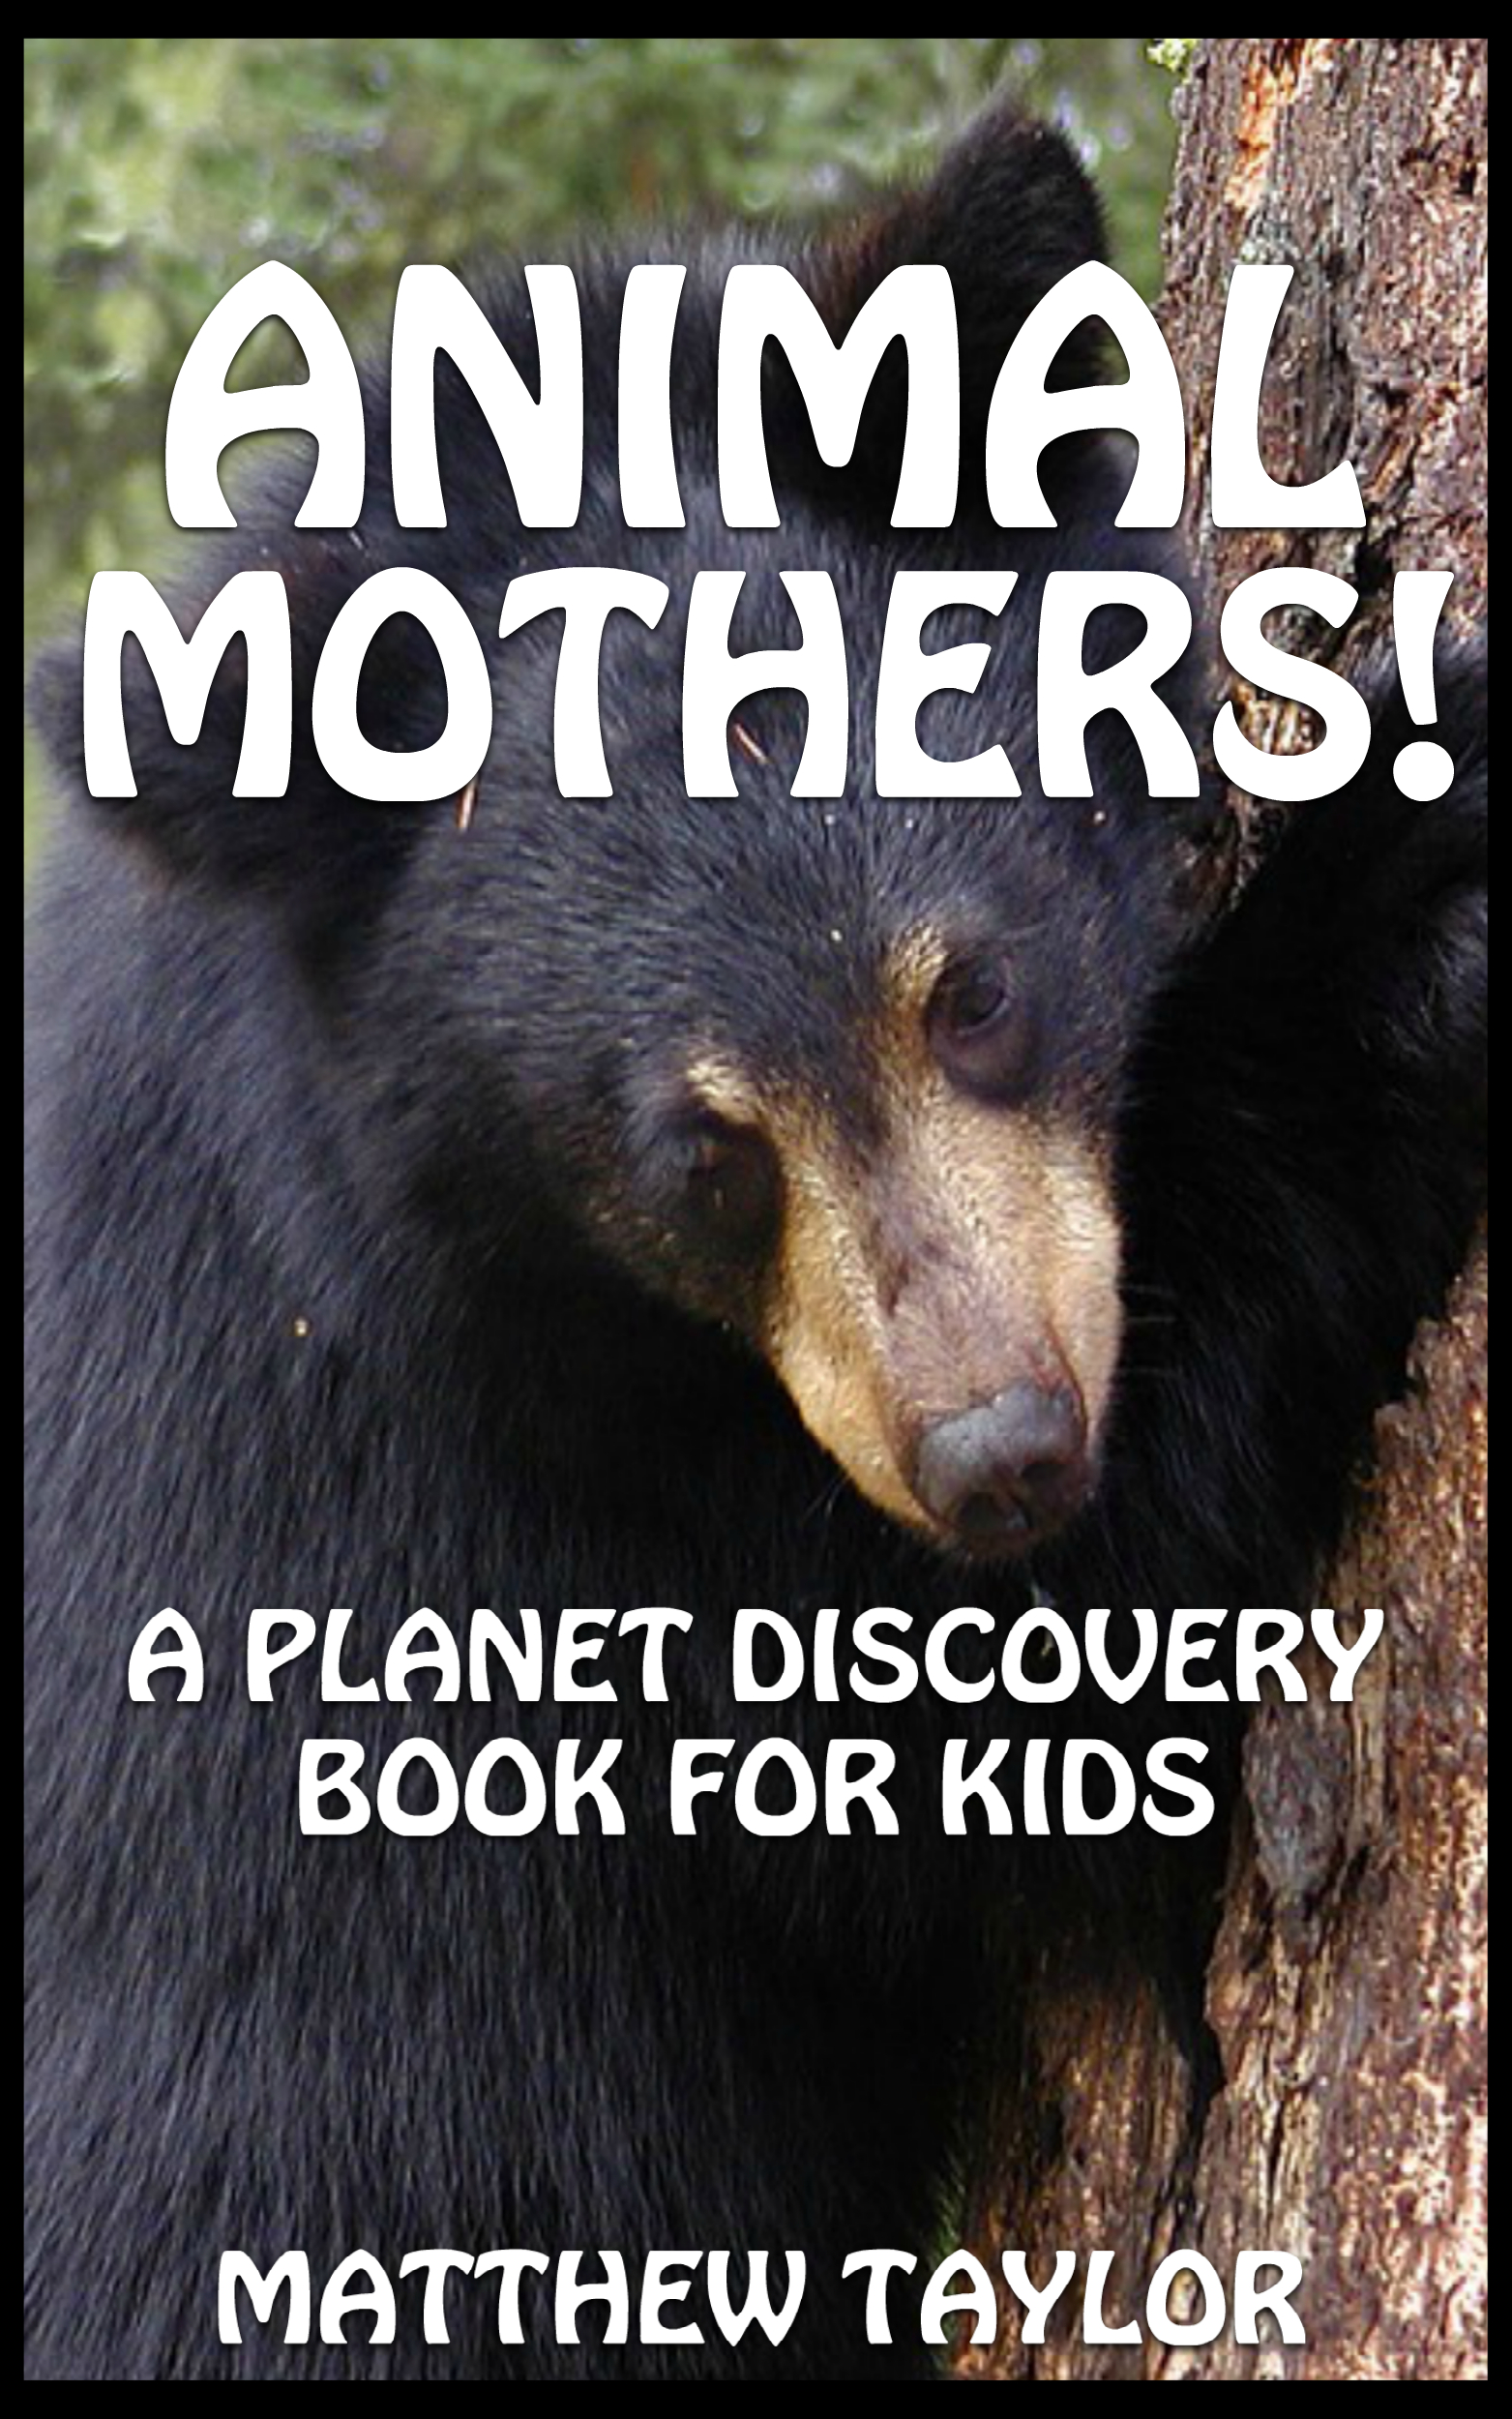 Animal Mothers! – Author Caren Cantrell | Children's Author | Writer